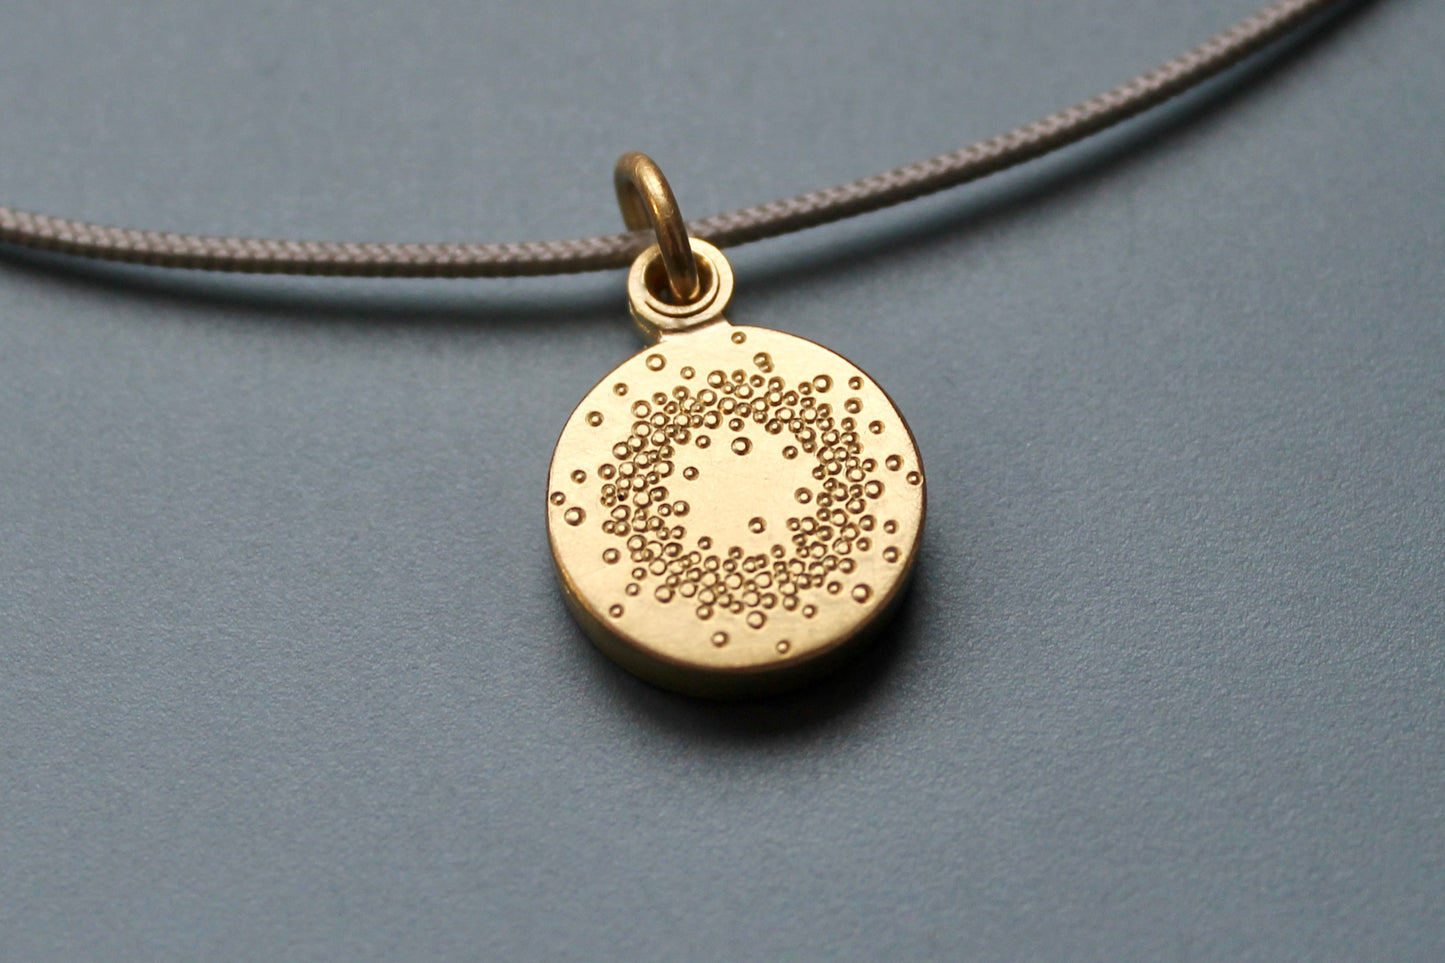 small golden locket for one picture with 1000 dots design